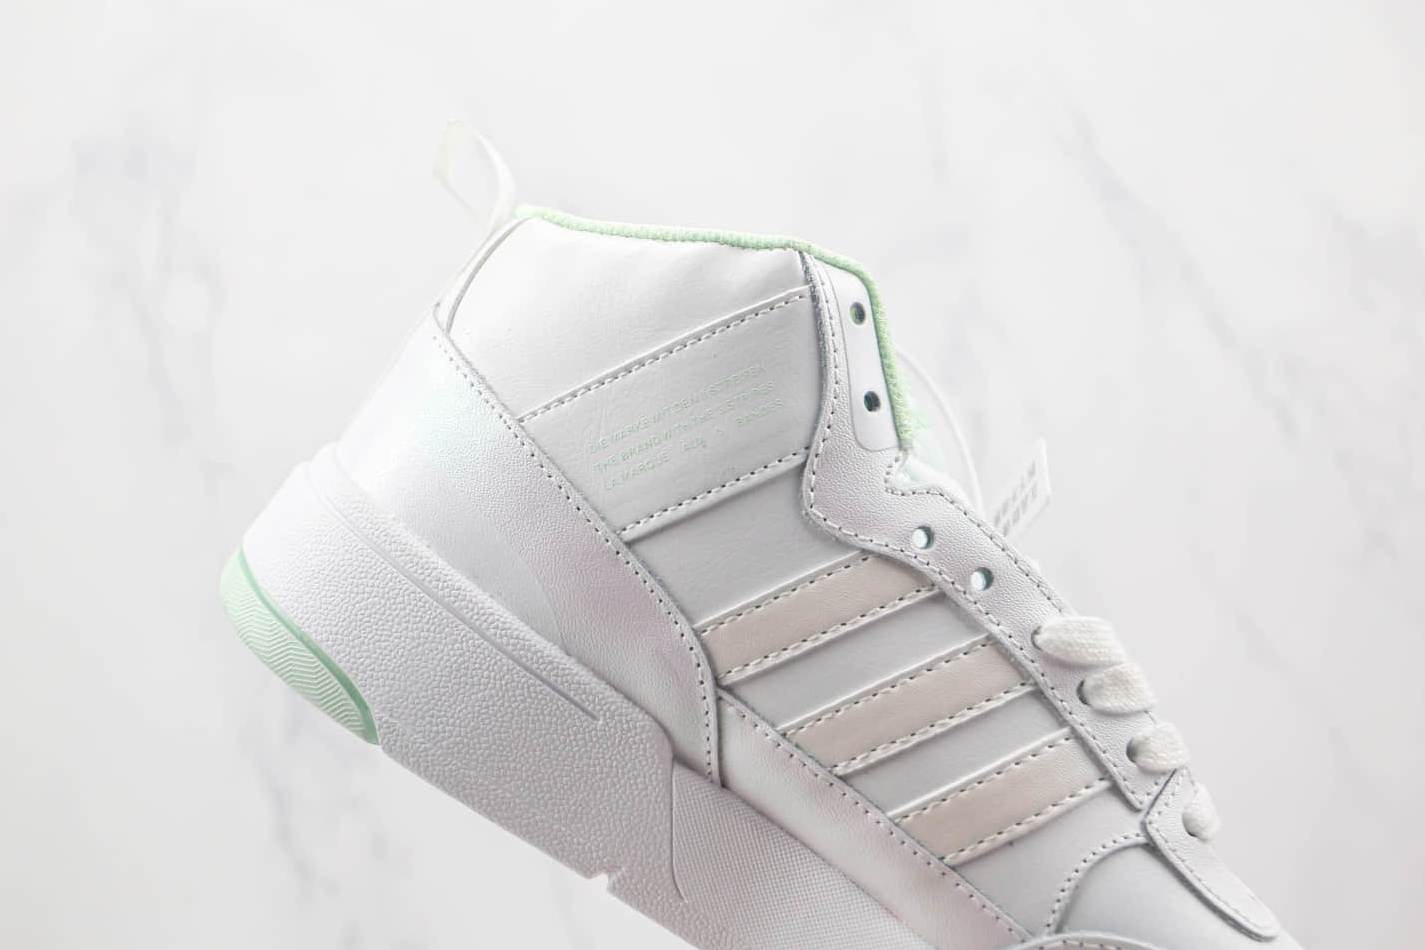 Adidas Originals Post Up Sneakers White GX2490 - Classic Style & Supreme Comfort